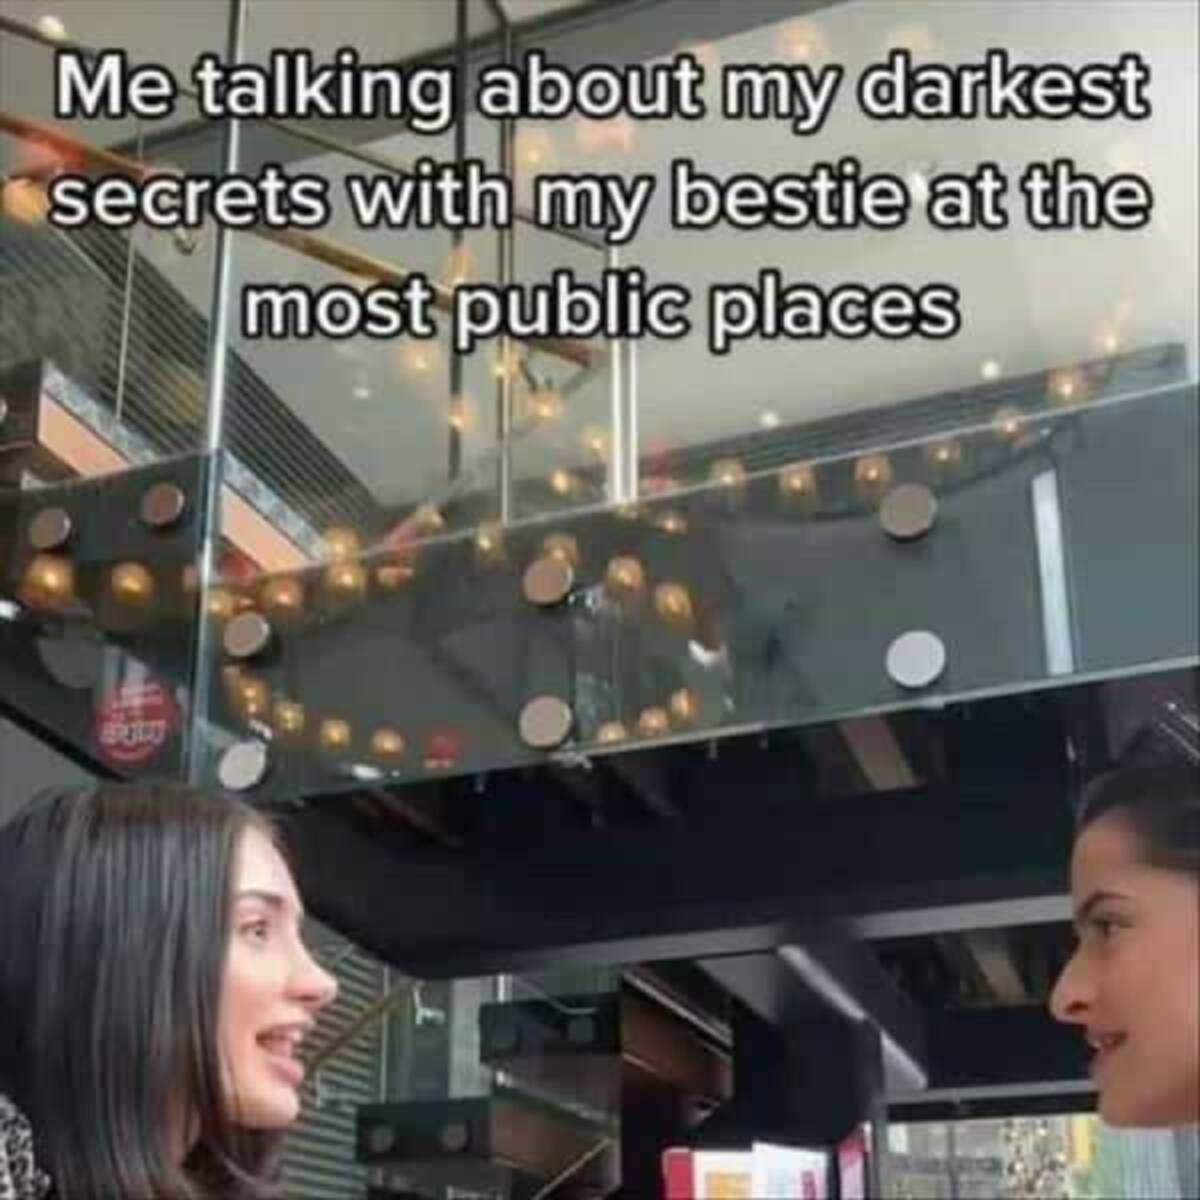 online memes - Me talking about my darkest secrets with my bestie at the most public places Bro